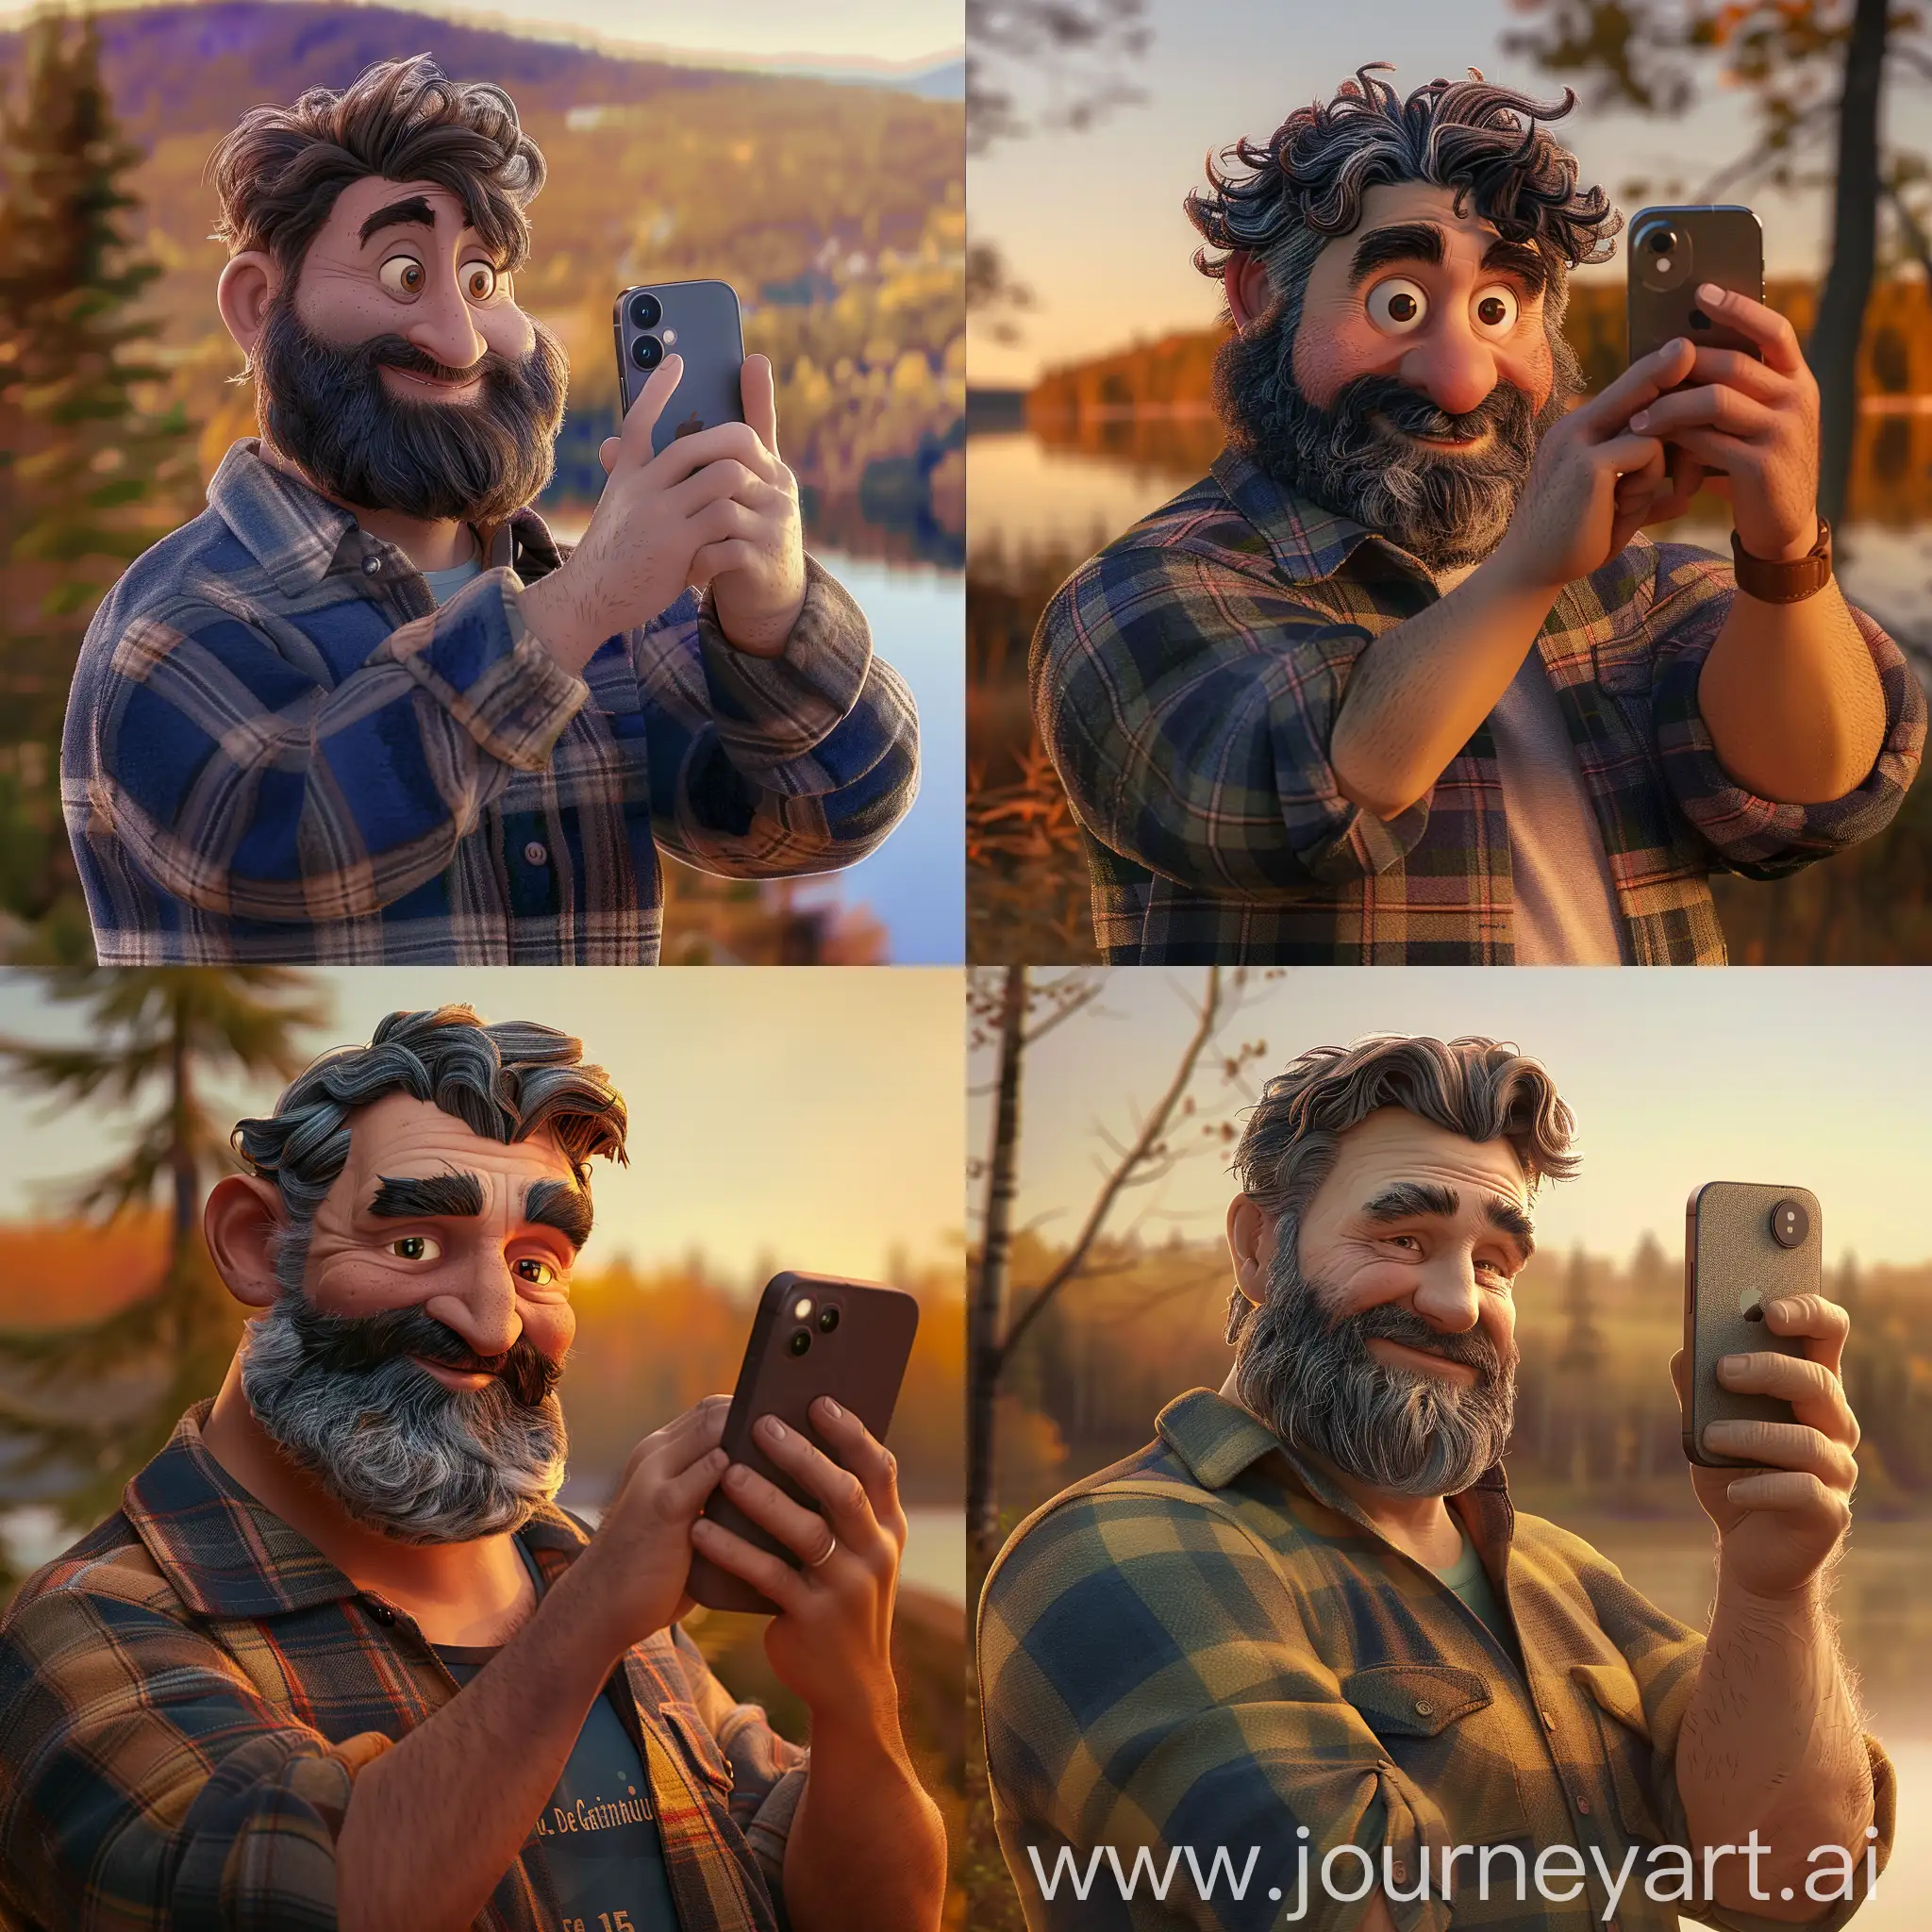 Imagine a character named Jacques DeGatineau, conceived by the comedic mind of Norm Macdonald. Jacques hails from the picturesque region of Temiskaming, Quebec, embodying the quintessential traits of its residents. He is depicted taking a selfie, presumably with an iPhone 15, showcasing not only the device but also his unique personality and background.  Jacques is in his late 30s, with a rugged yet amiable appearance. He has a thick, well-groomed beard and expressive eyes that hint at a life filled with both laughter and contemplation. His hair is slightly tousled, suggesting he doesn't fuss much about his looks, yet there's an undeniable charm to his disheveled style. Jacques wears a flannel shirt, a staple in the wardrobe of someone accustomed to the brisk Canadian outdoors, layered over a simple, worn-in t-shirt.  The background of the selfie is a blur of the Temiskaming landscape, with hints of a serene lake and the lush, dense forests characteristic of Quebec. The lighting is soft, with the golden hues of a late afternoon sun casting a warm glow on Jacques's face, highlighting his features and the iPhone 15 in his hand.  As Jacques snaps the selfie, there's a playful smirk on his lips, a tribute to Norm Macdonald's signature humor. The image captures not just a moment but the essence of Jacques DeGatineau—a man of simplicity, warmth, and a subtle complexity that mirrors the depth of his creator's comedy.